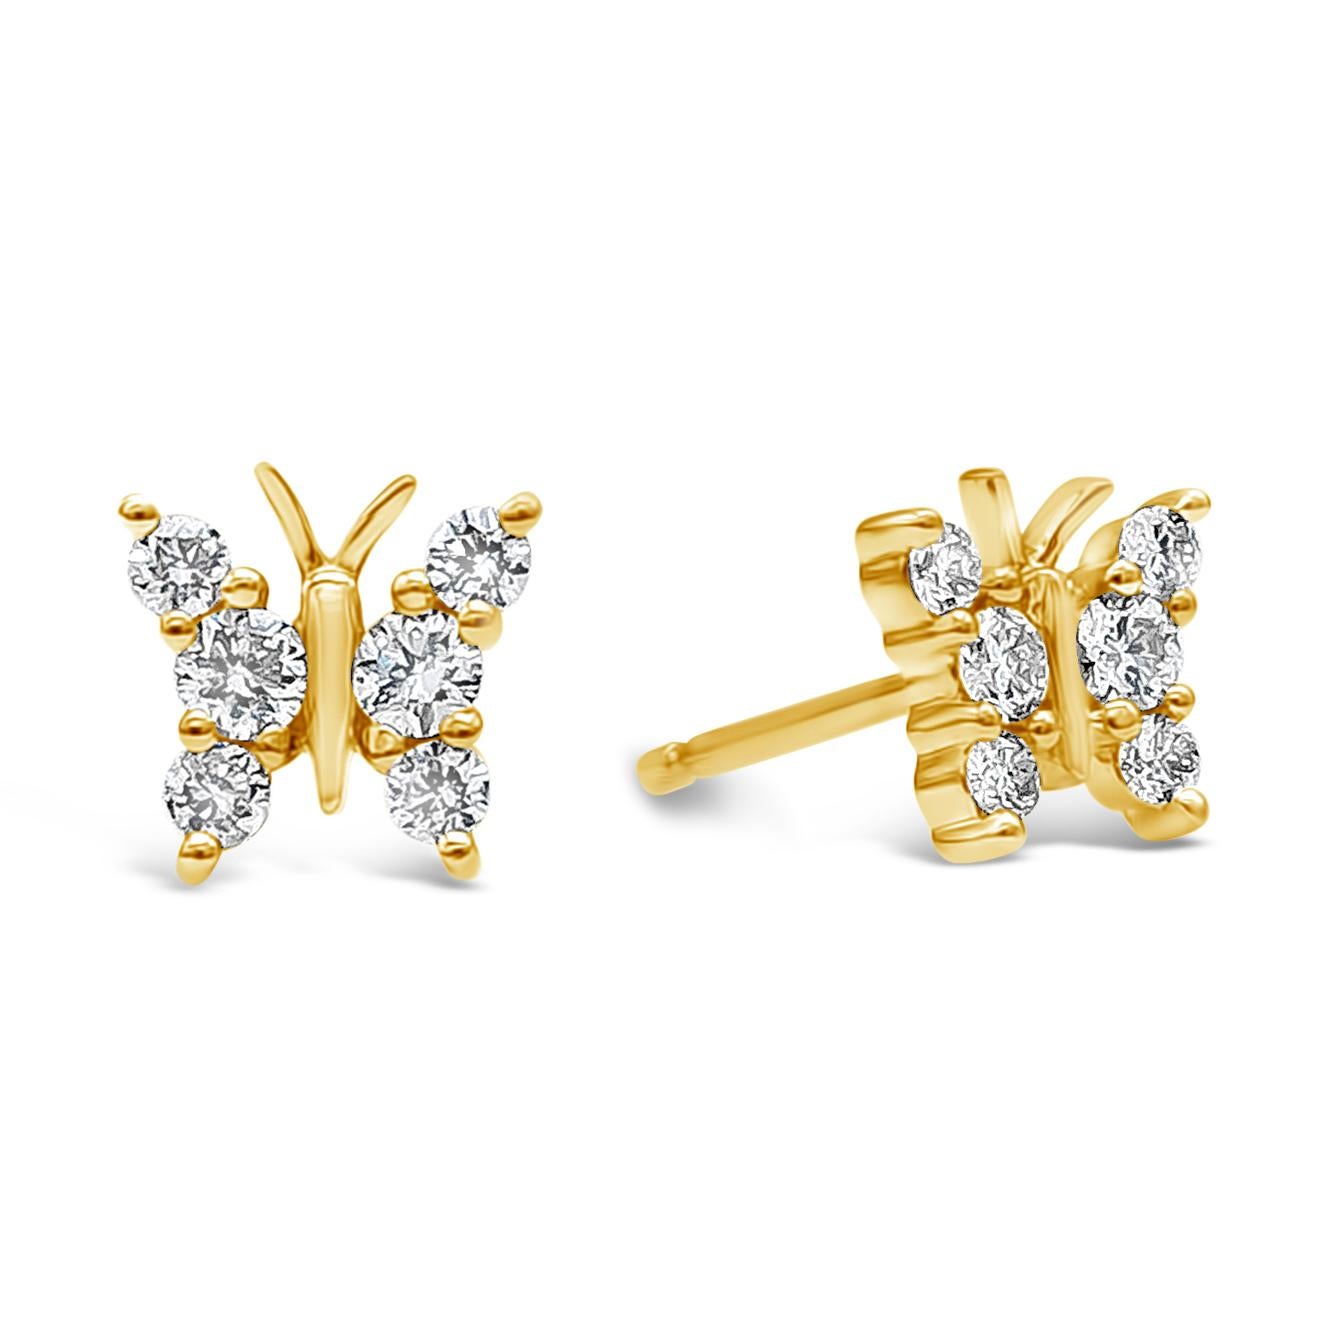 A simple but unique pair of fashion earrings showcasing 12 pieces of round brilliant diamonds, set in a chic butterfly motif design made in 18k Yellow Gold. Diamonds weigh 0.30 carats total and a perfect everyday piece to wear.

Style available in